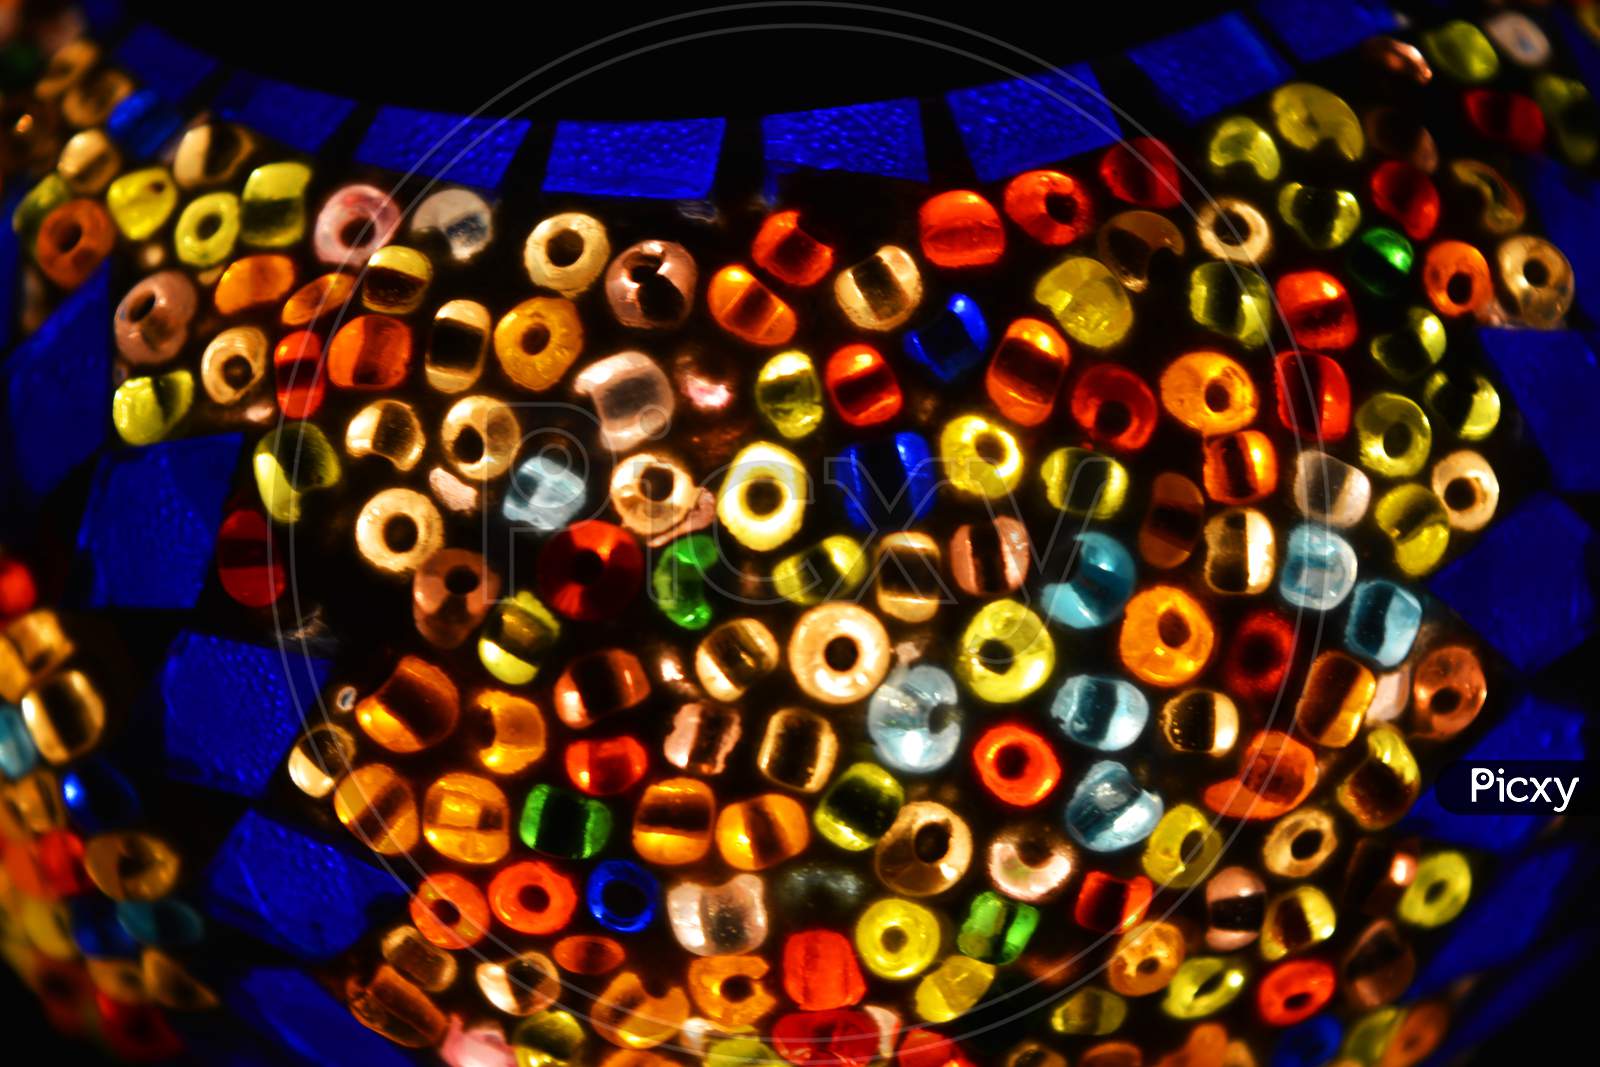 An unusual shade made of multicolored mosaics, colored beads and bright glass is located in the Turkish national lamp.